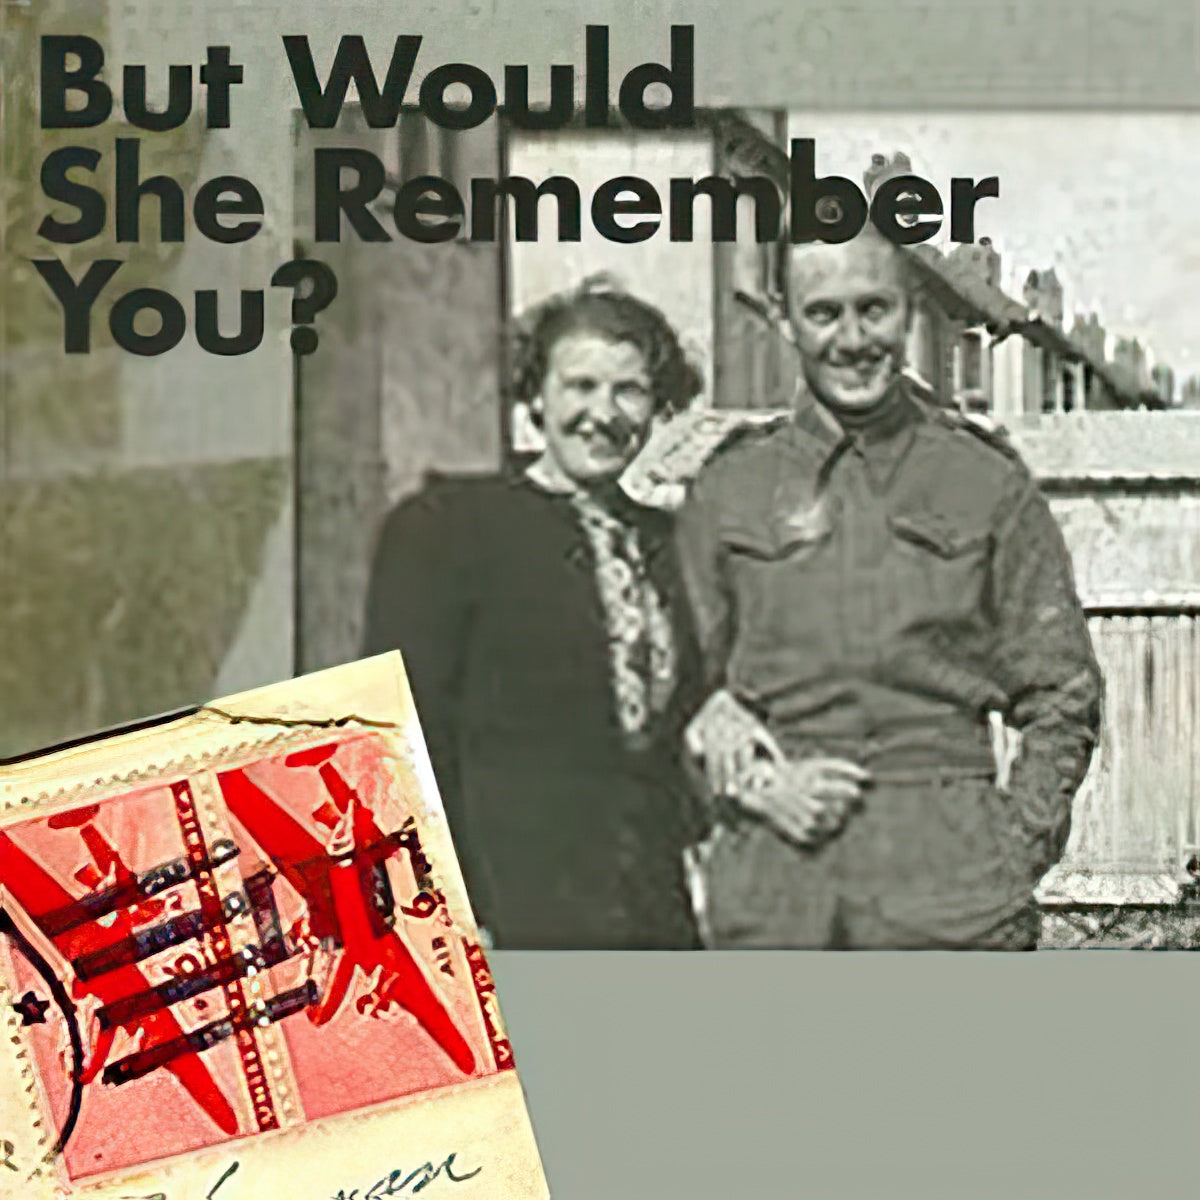 But Would She Remember You? — Sheet Music and Electronics (Bass Clarinet)